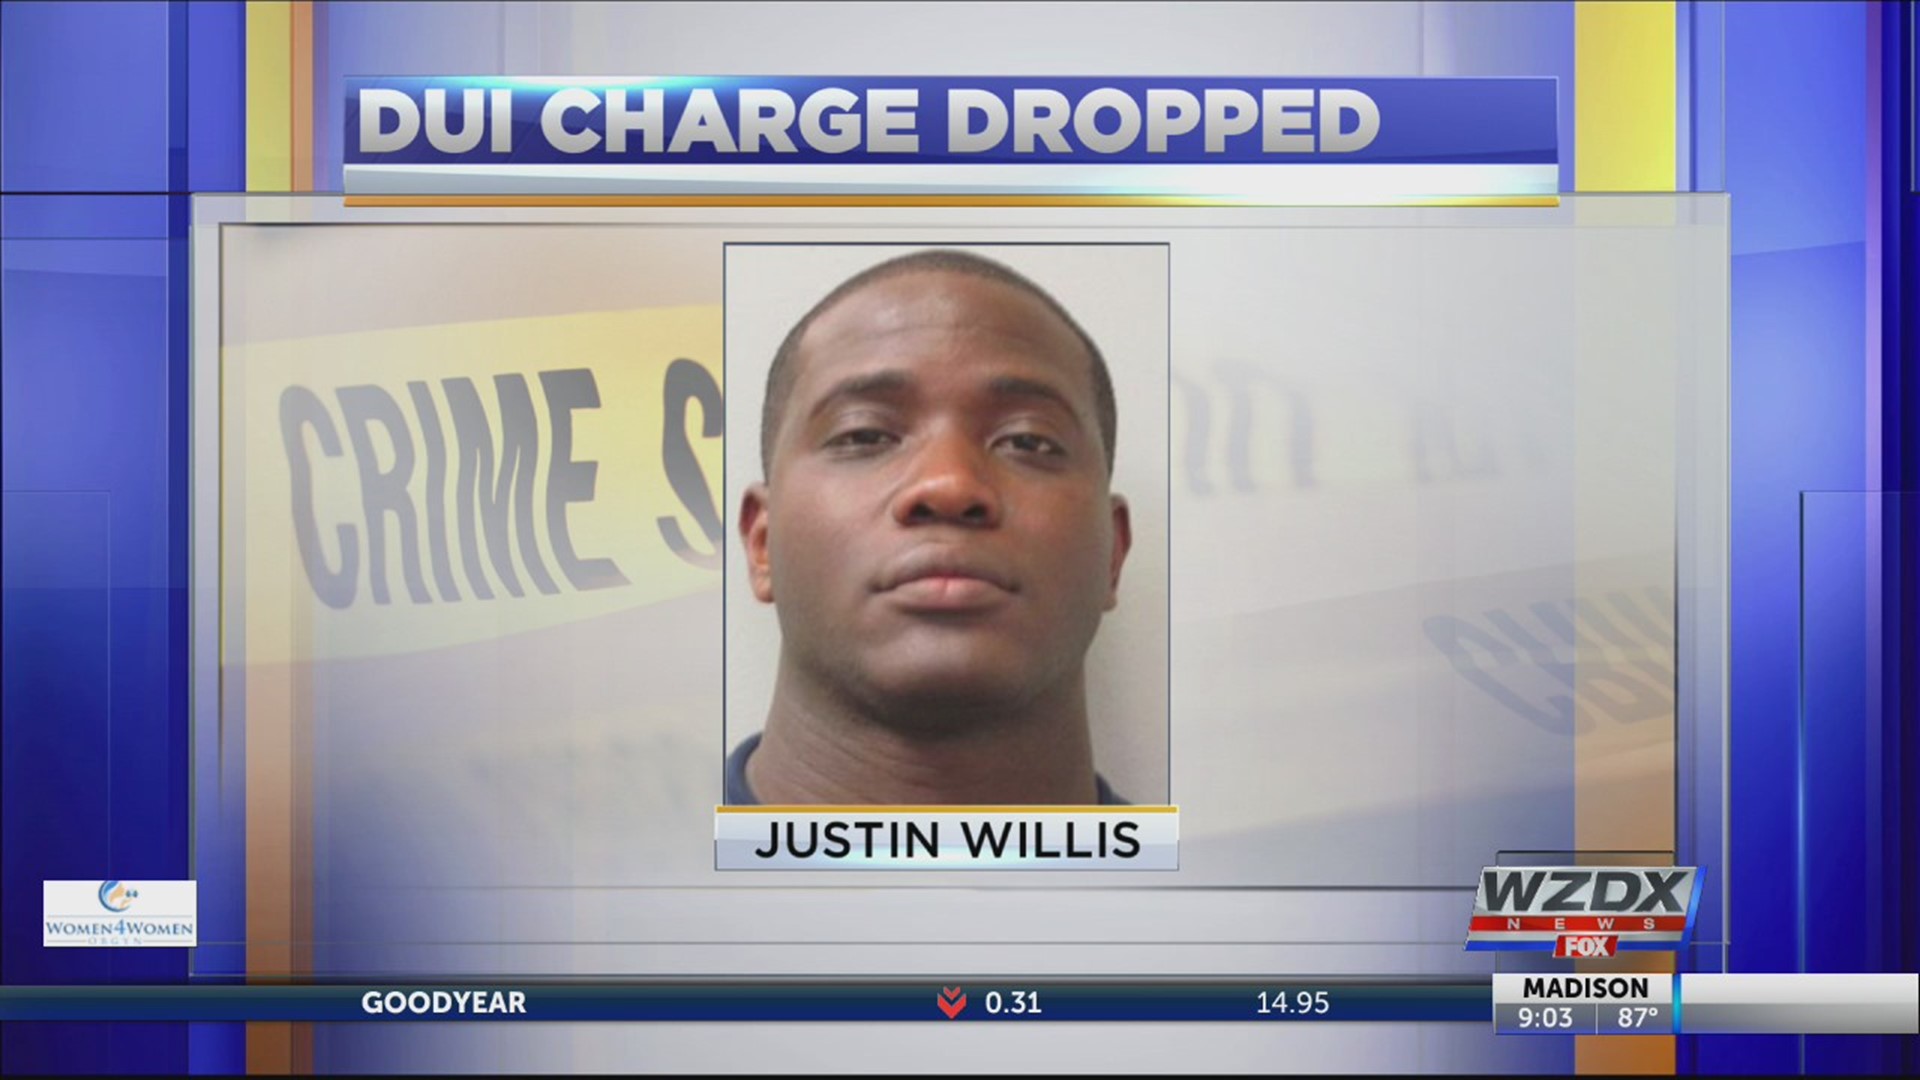 The DUI charge filed against a Huntsville Police officer has been dismissed.